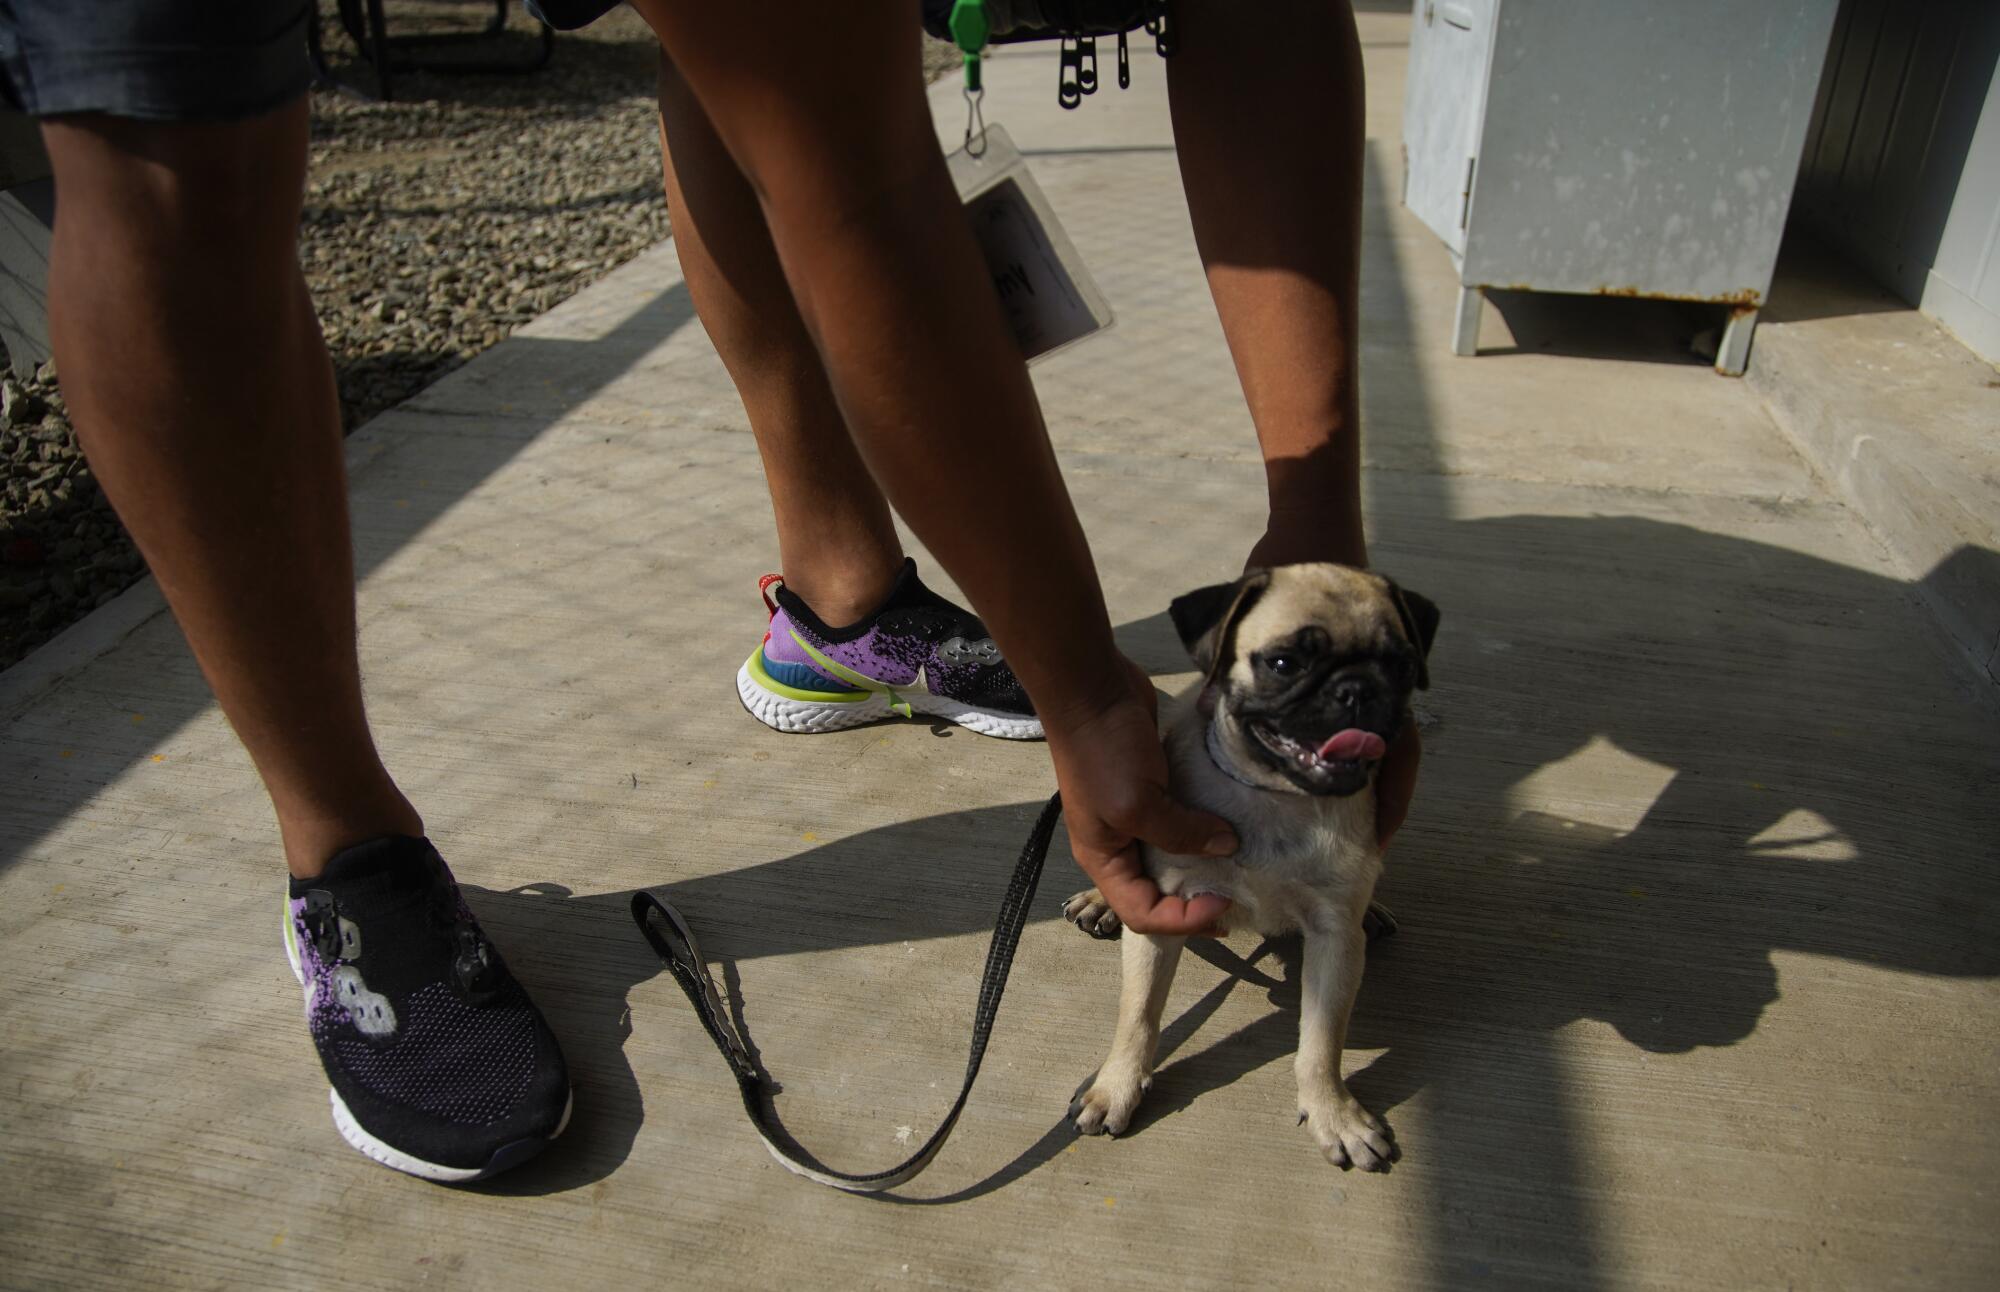 A Honduran family walks a pug puppy named Nina they adopted from the street